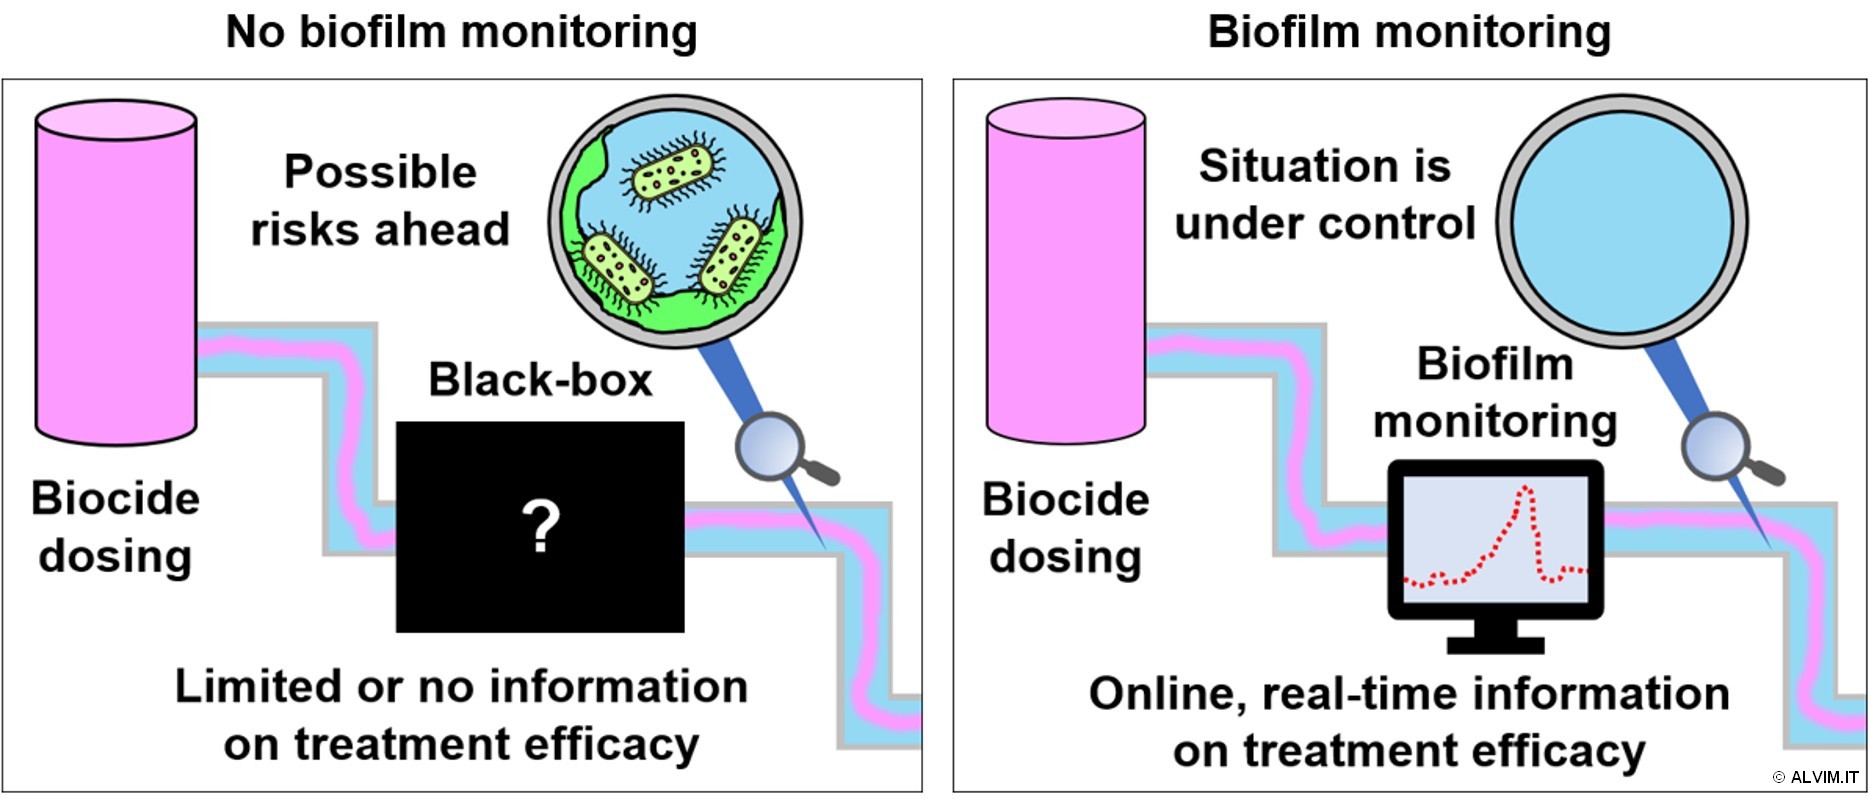 Importance of biofilm monitoring to check the efficacy of the sanitation protocol